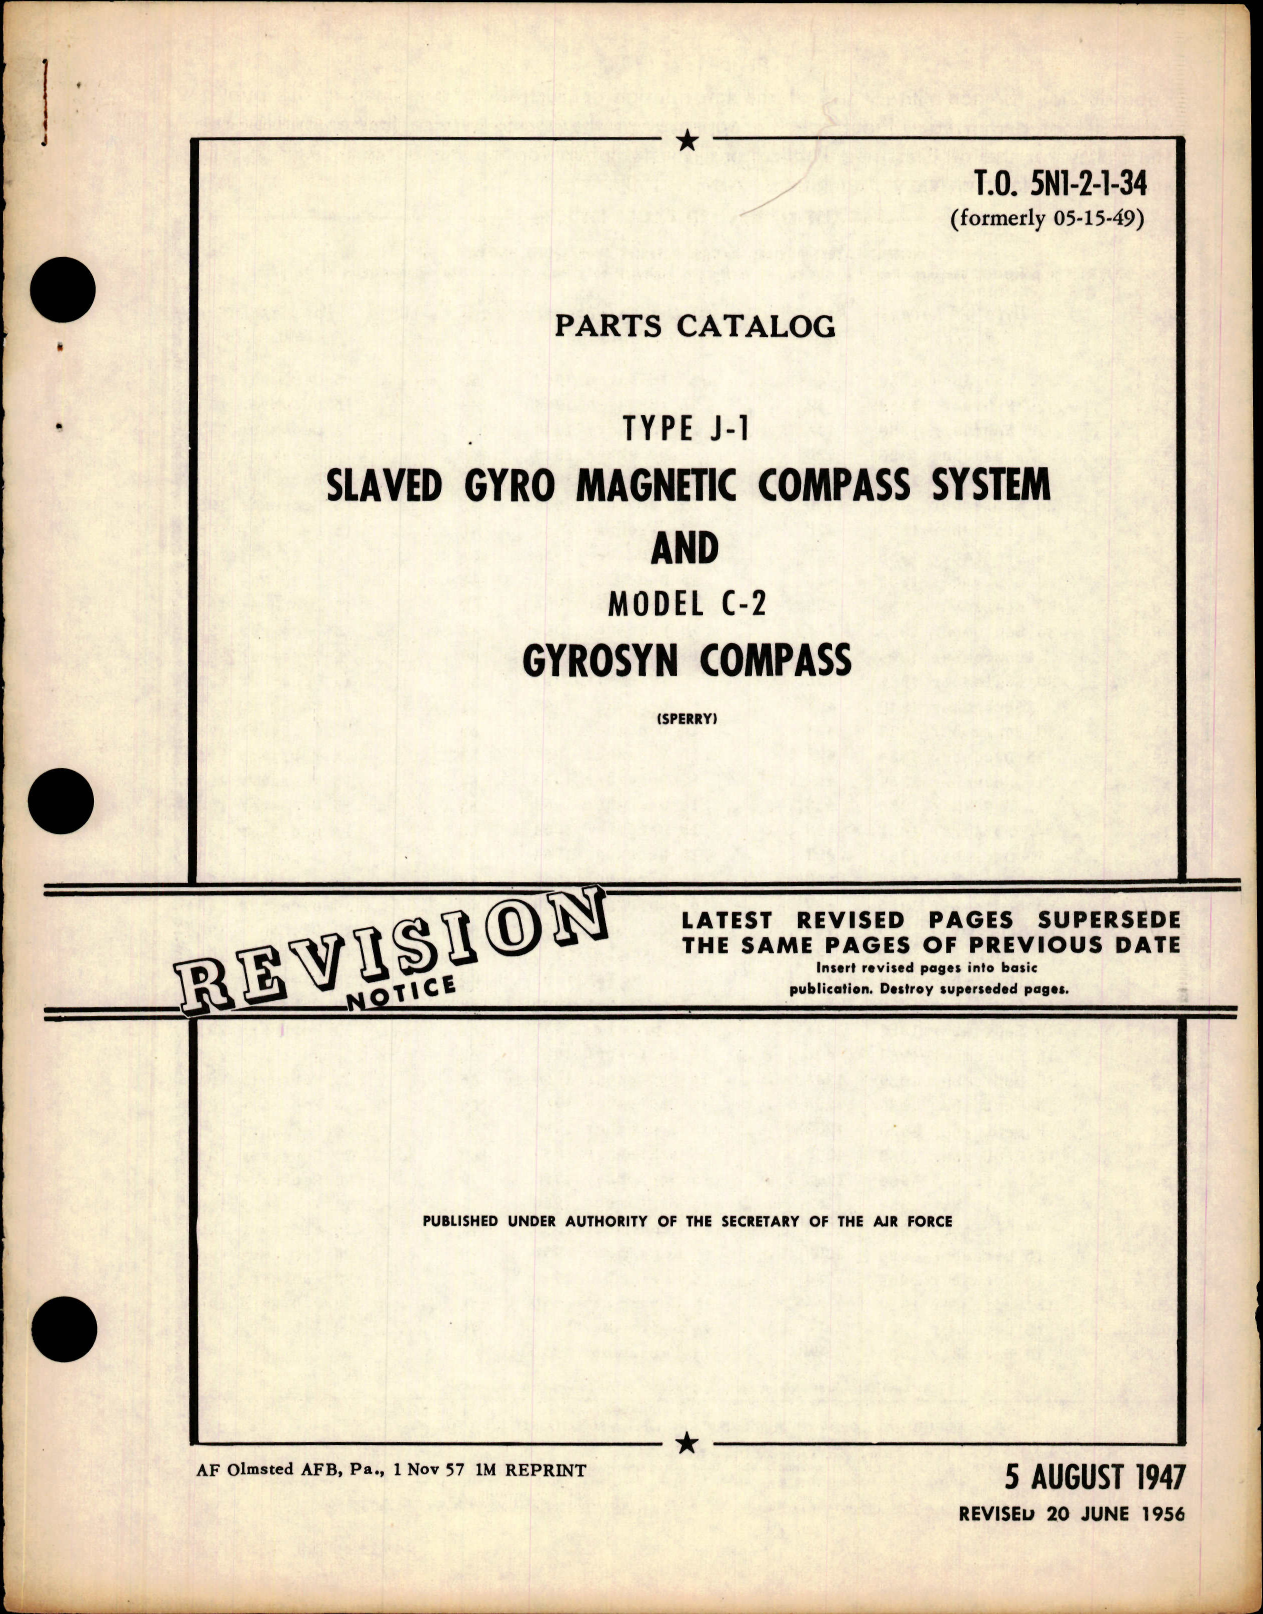 Sample page 5 from AirCorps Library document: Parts Catalog for Slaved Gyro Magnetic Compass System Type J-1, and Gyrosyn Compass Model C-2